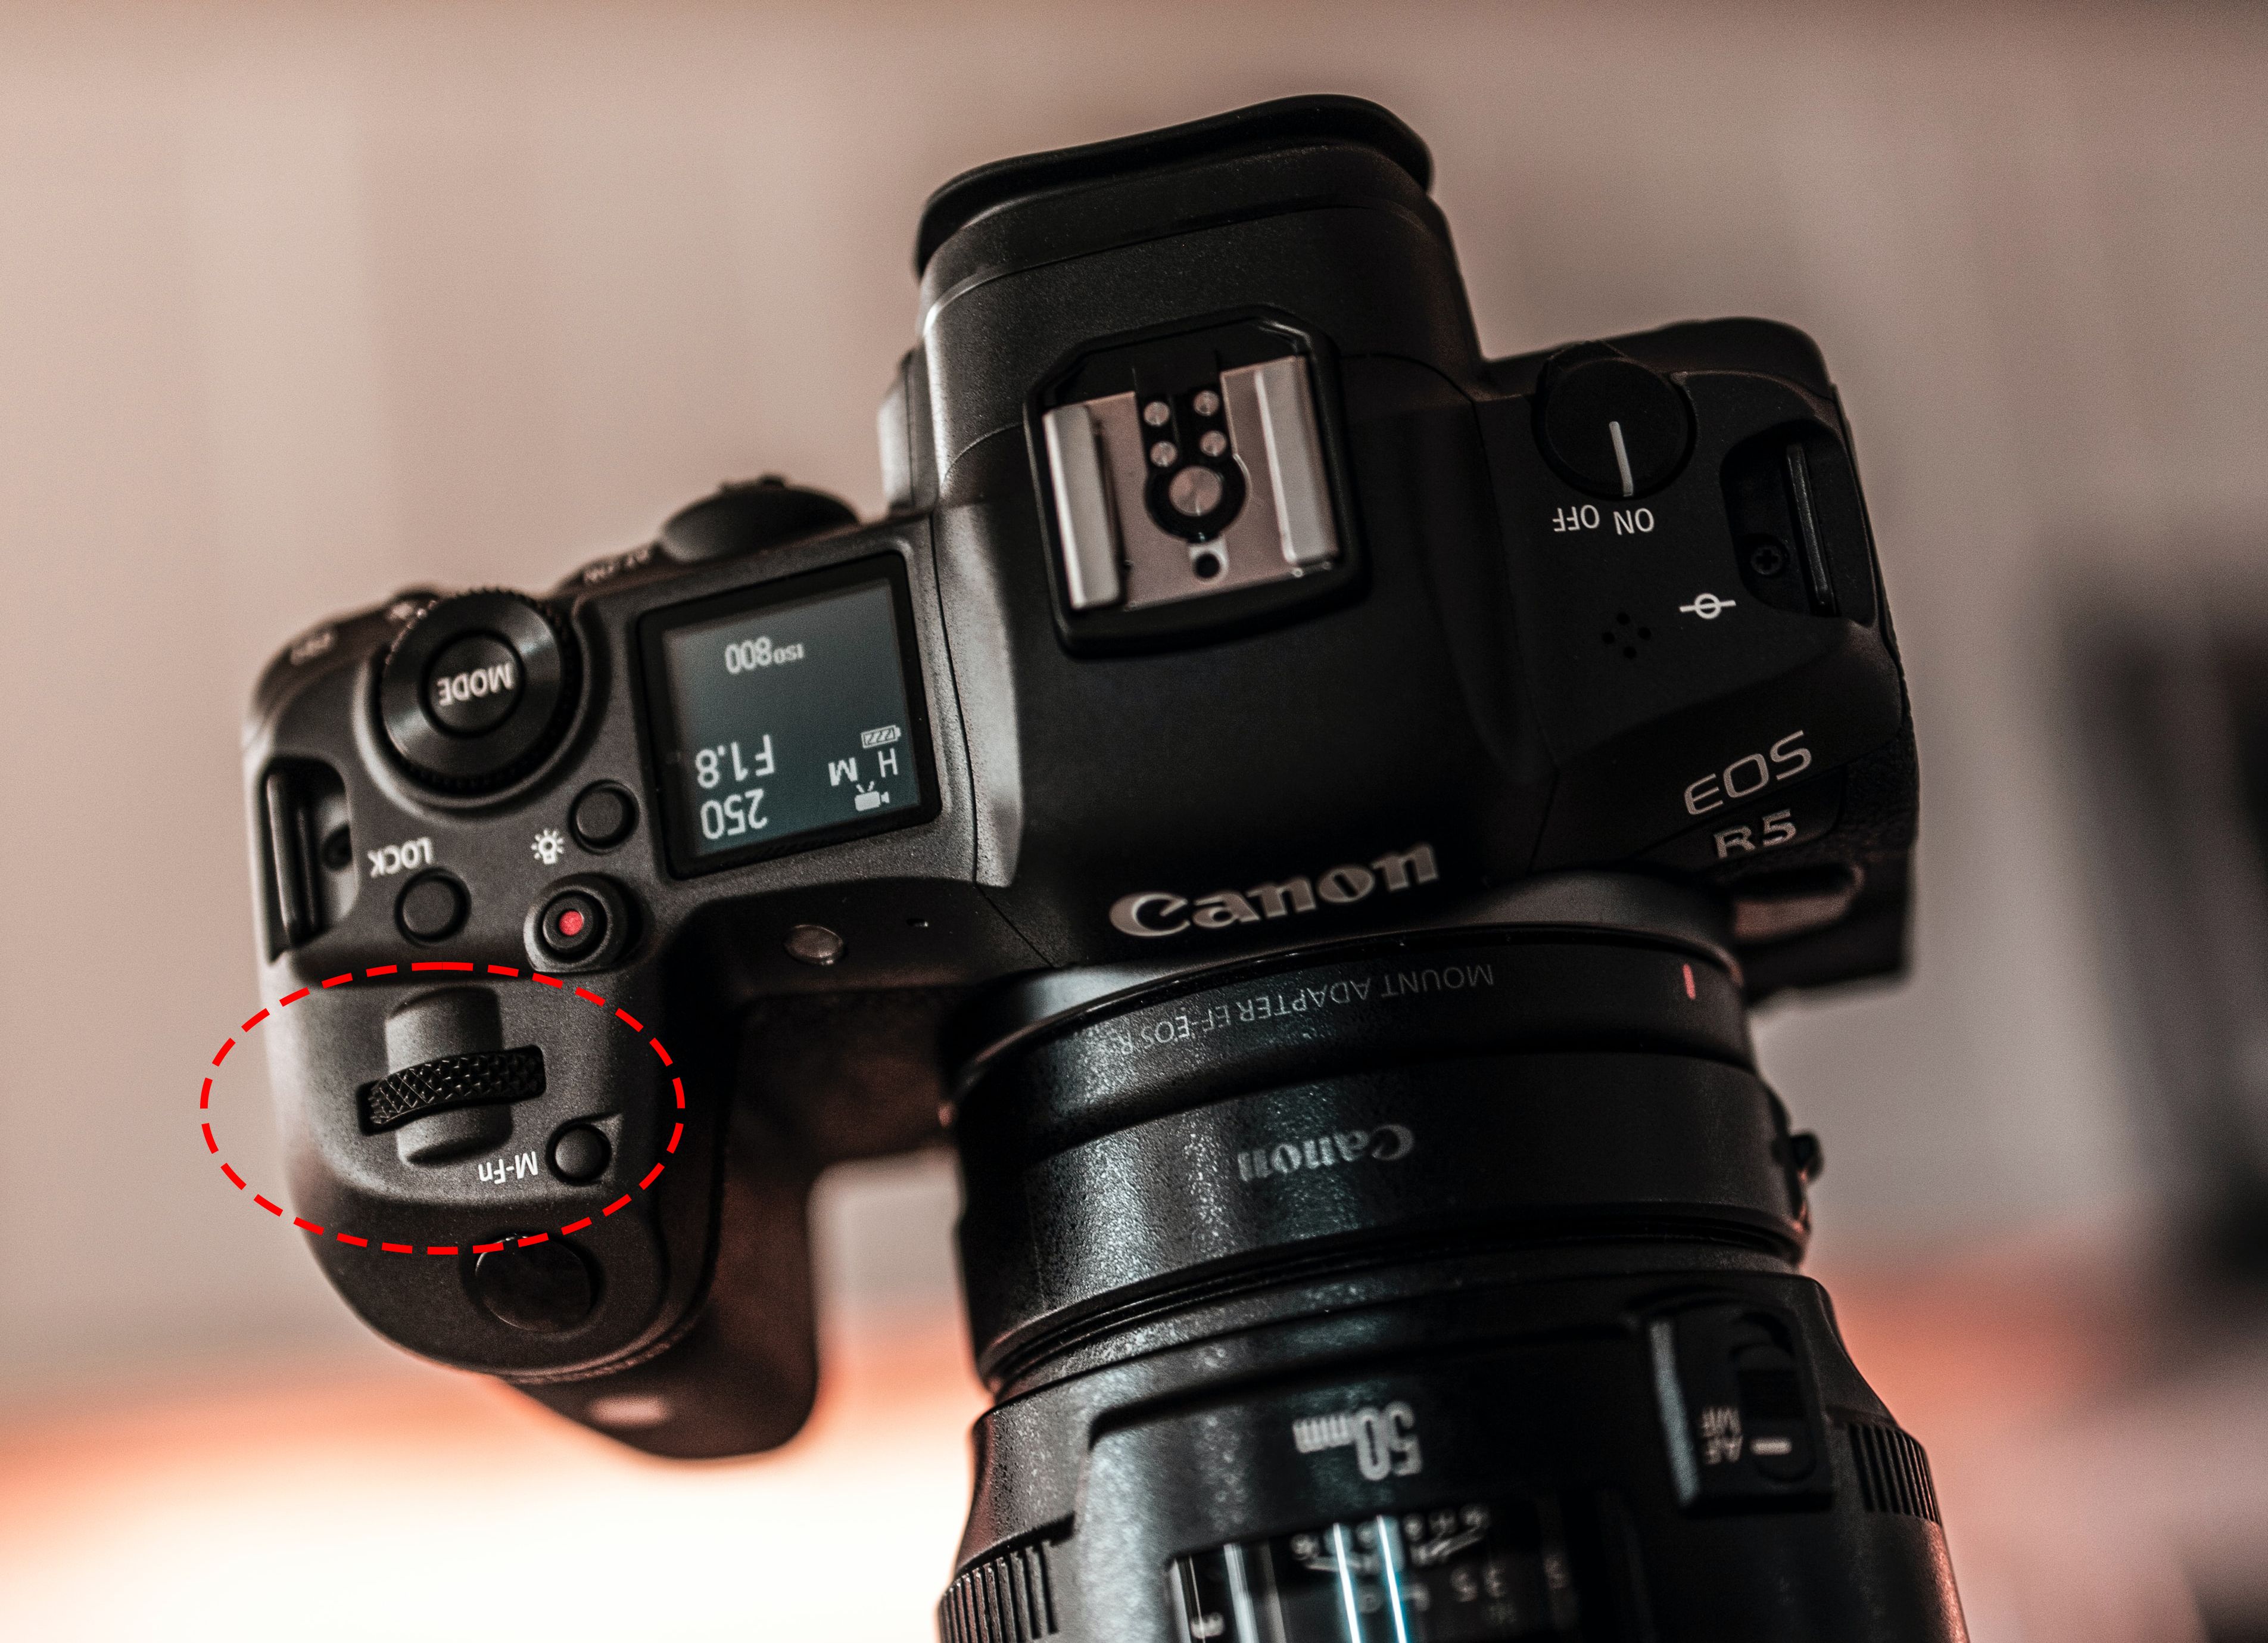 How to change your aperture settings on a Canon camera.